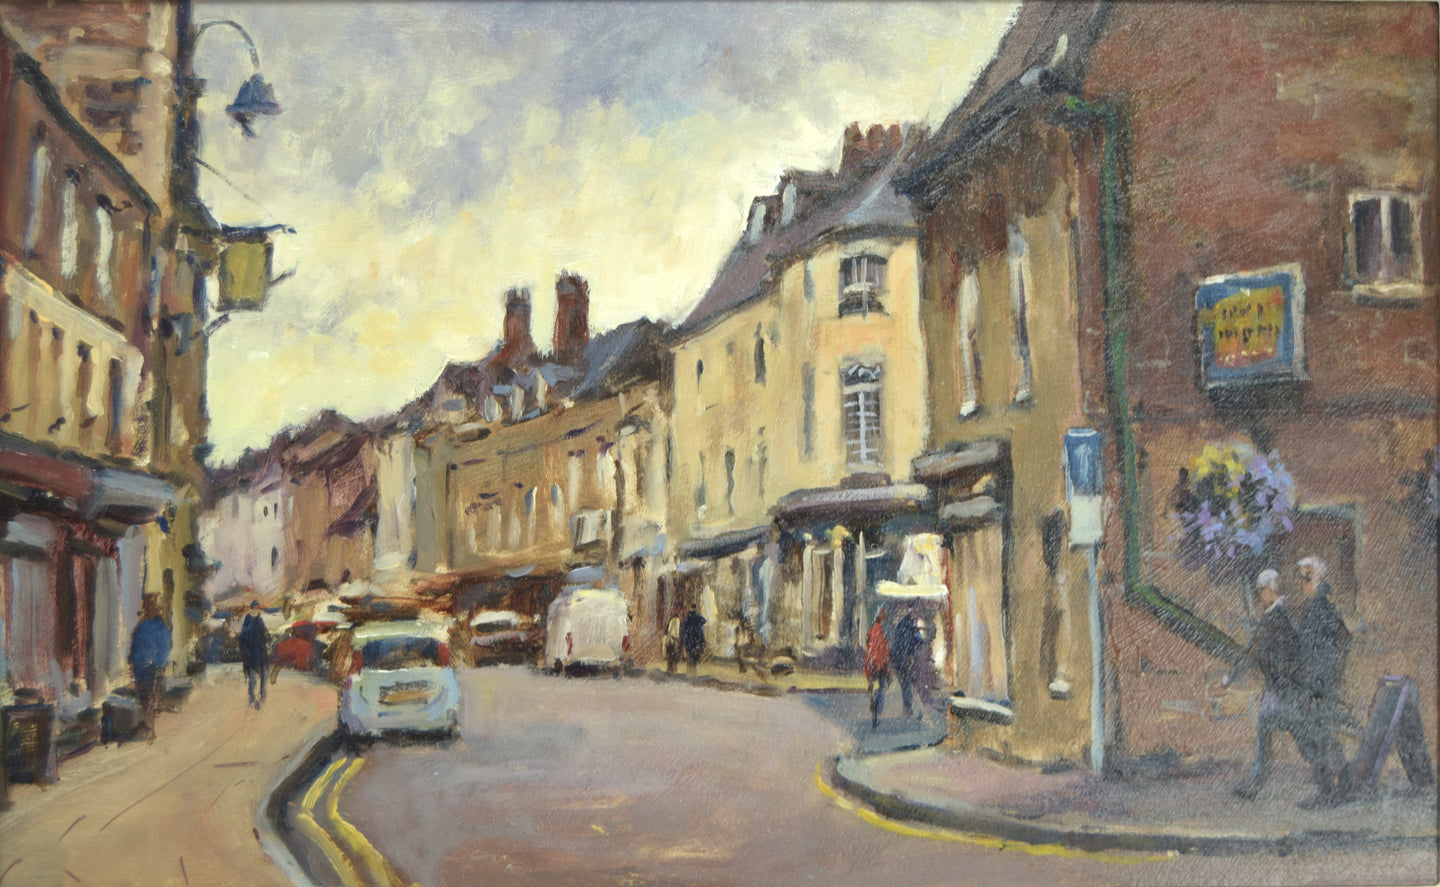 Corner of High Street East in oils by Terry Preen with the Falcon Hotel on the left